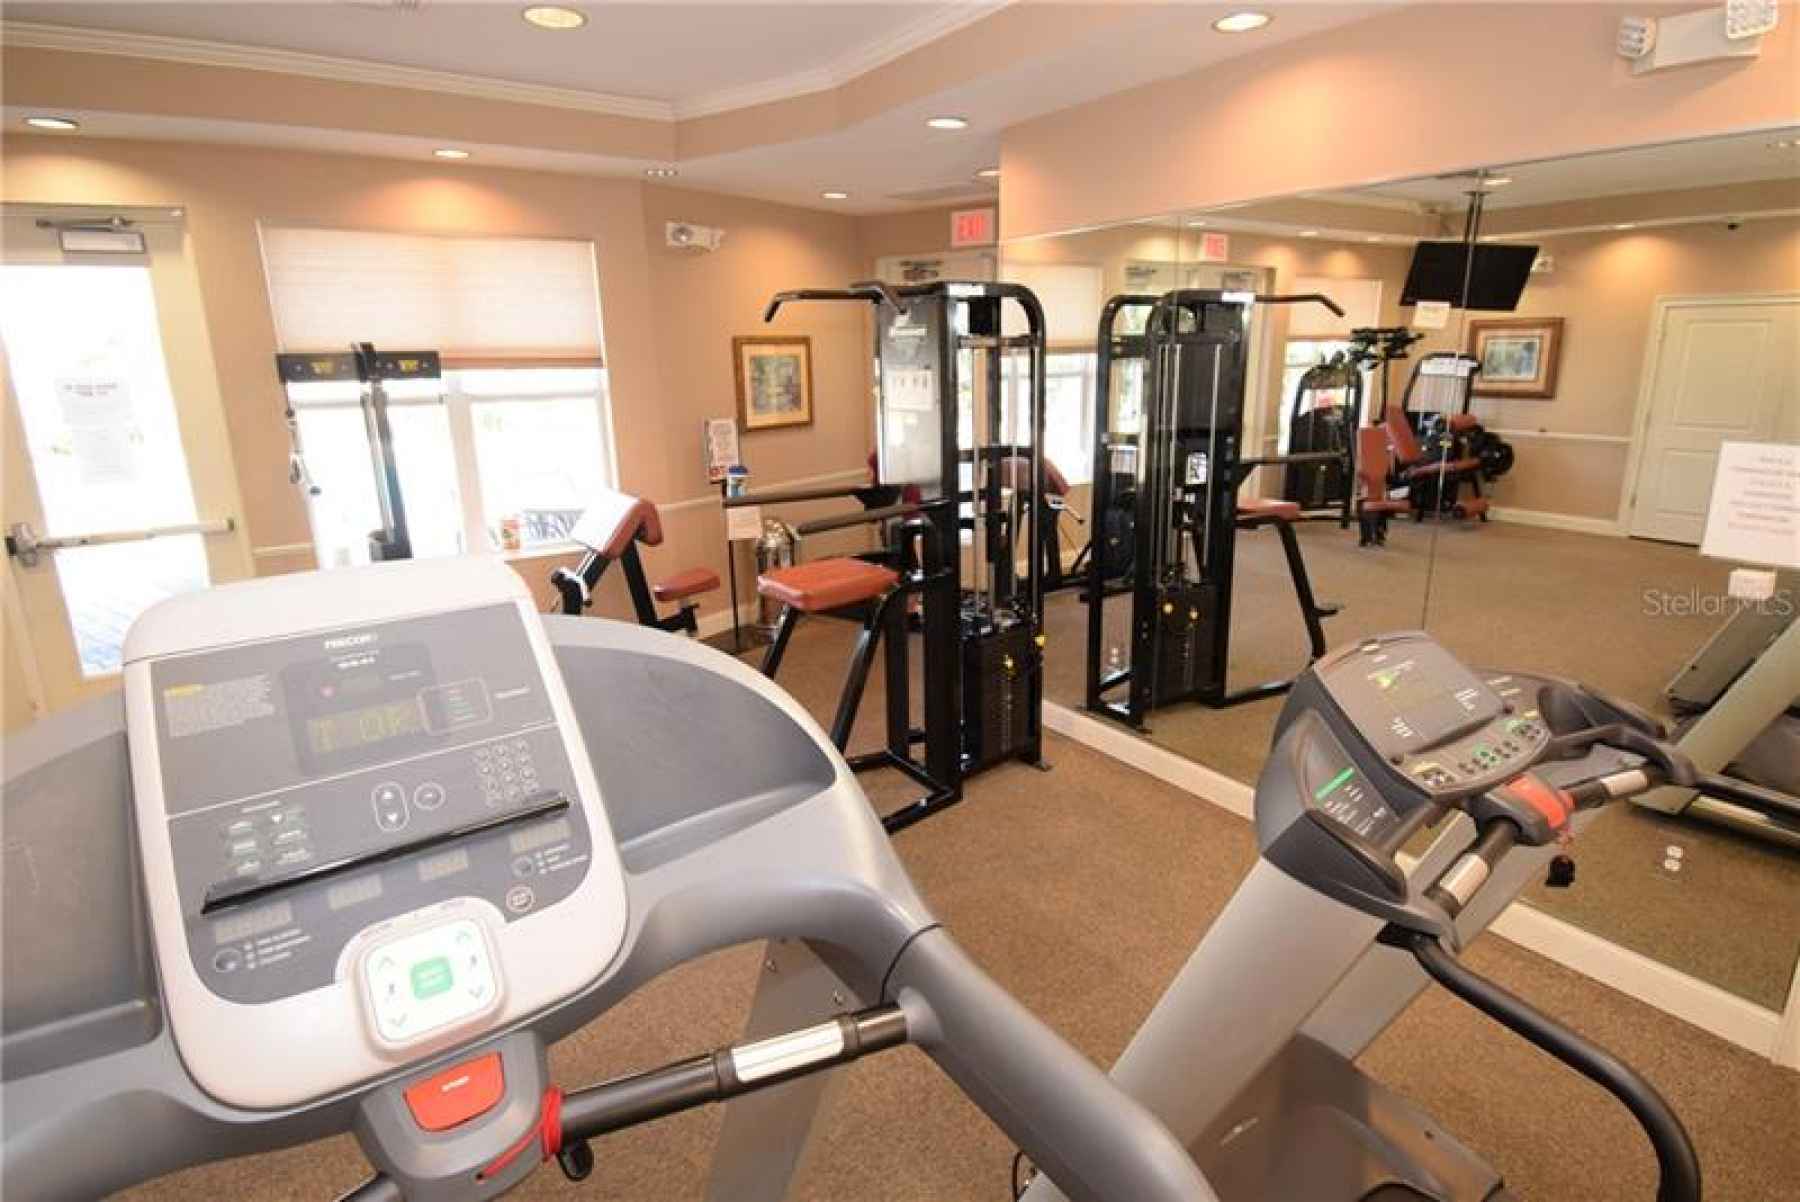 Fitness center at the clubhouse.